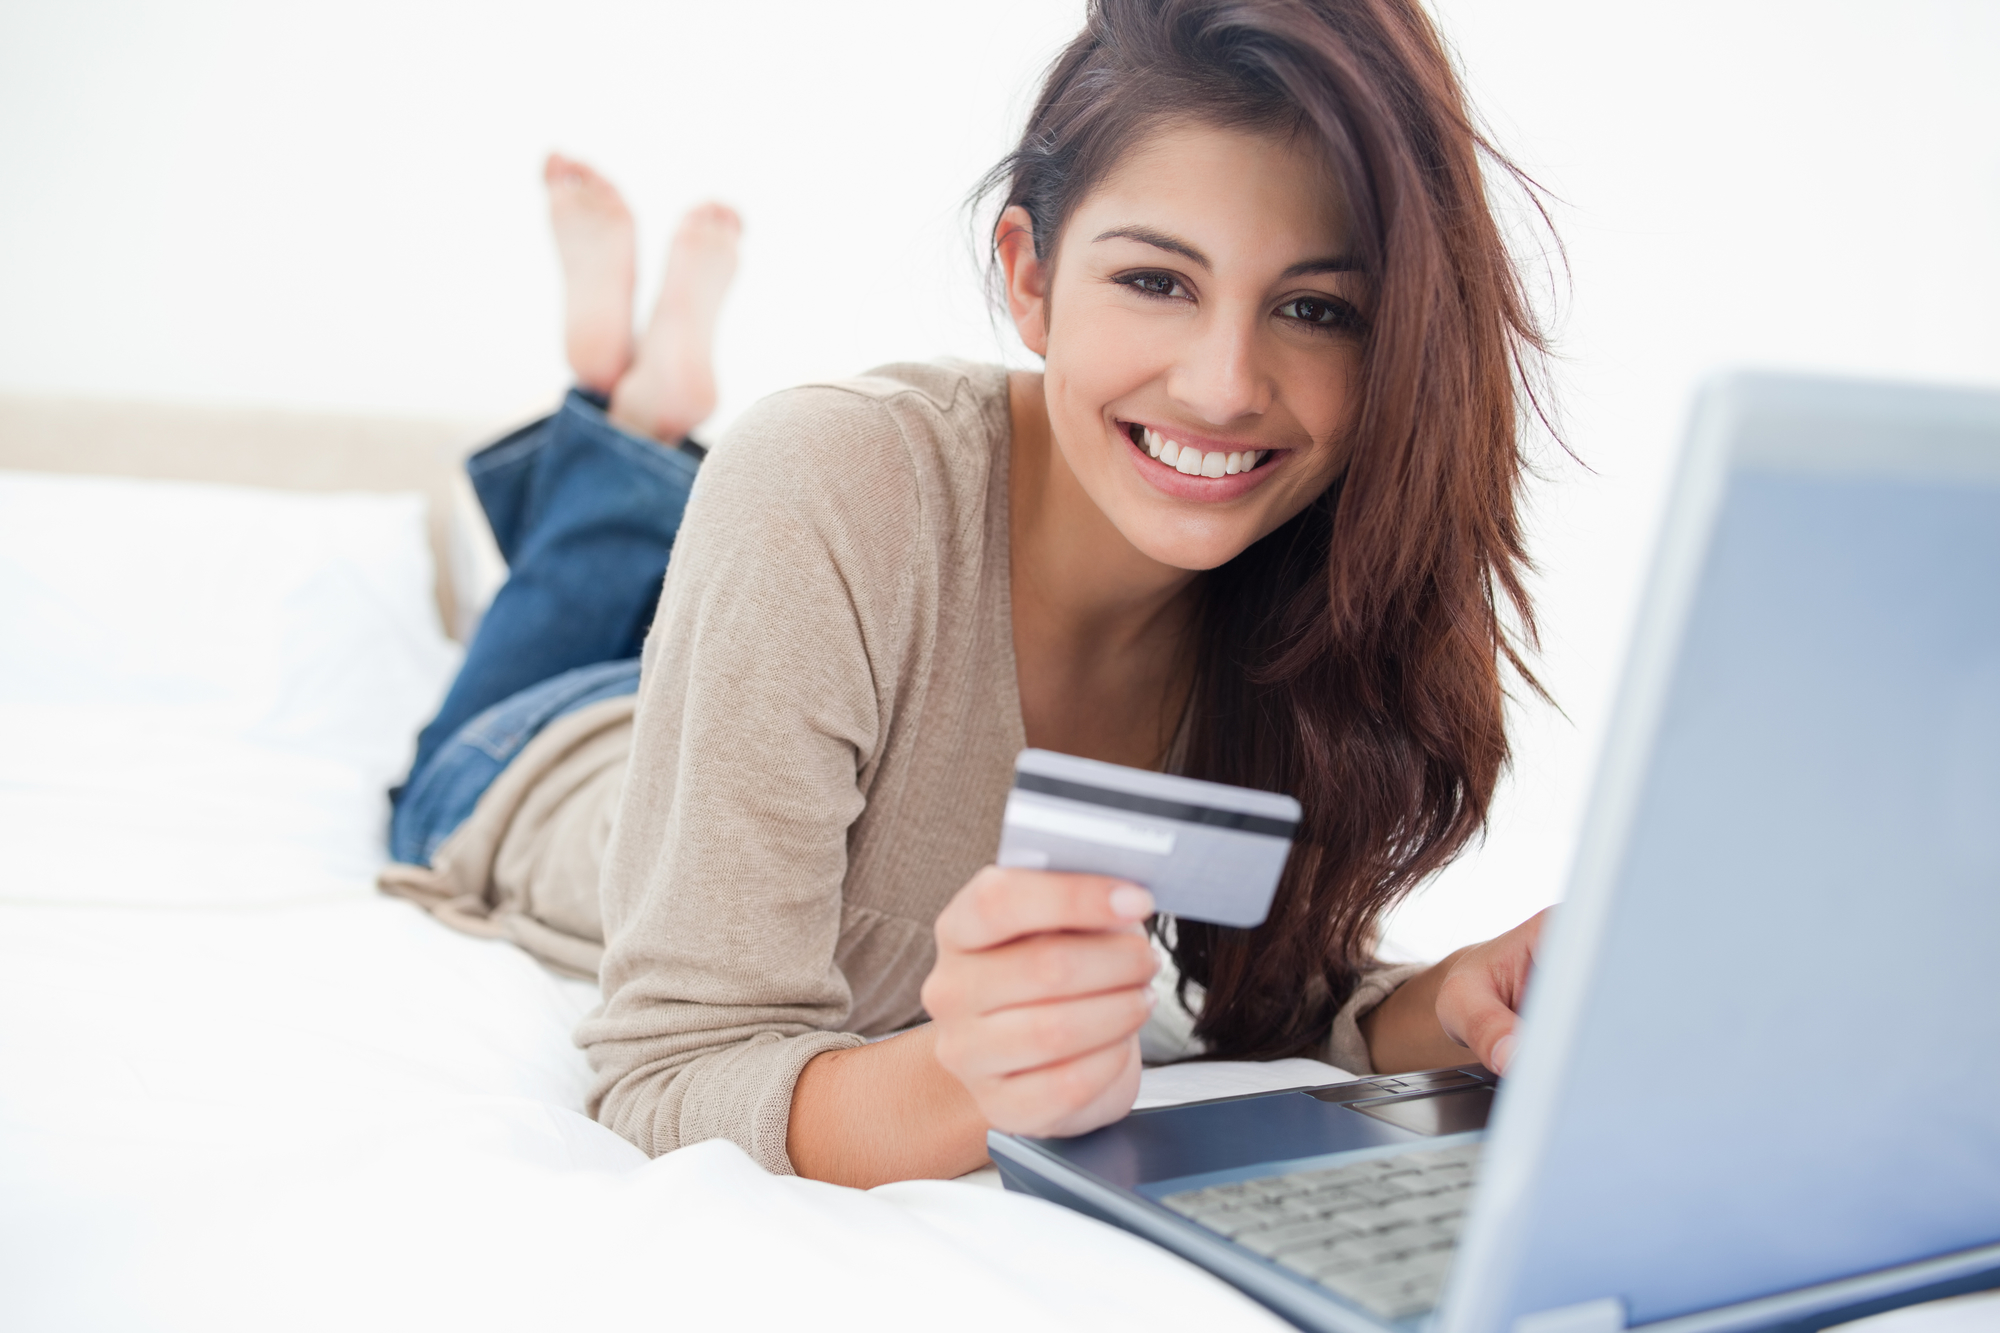 Using credit card to make online purchase